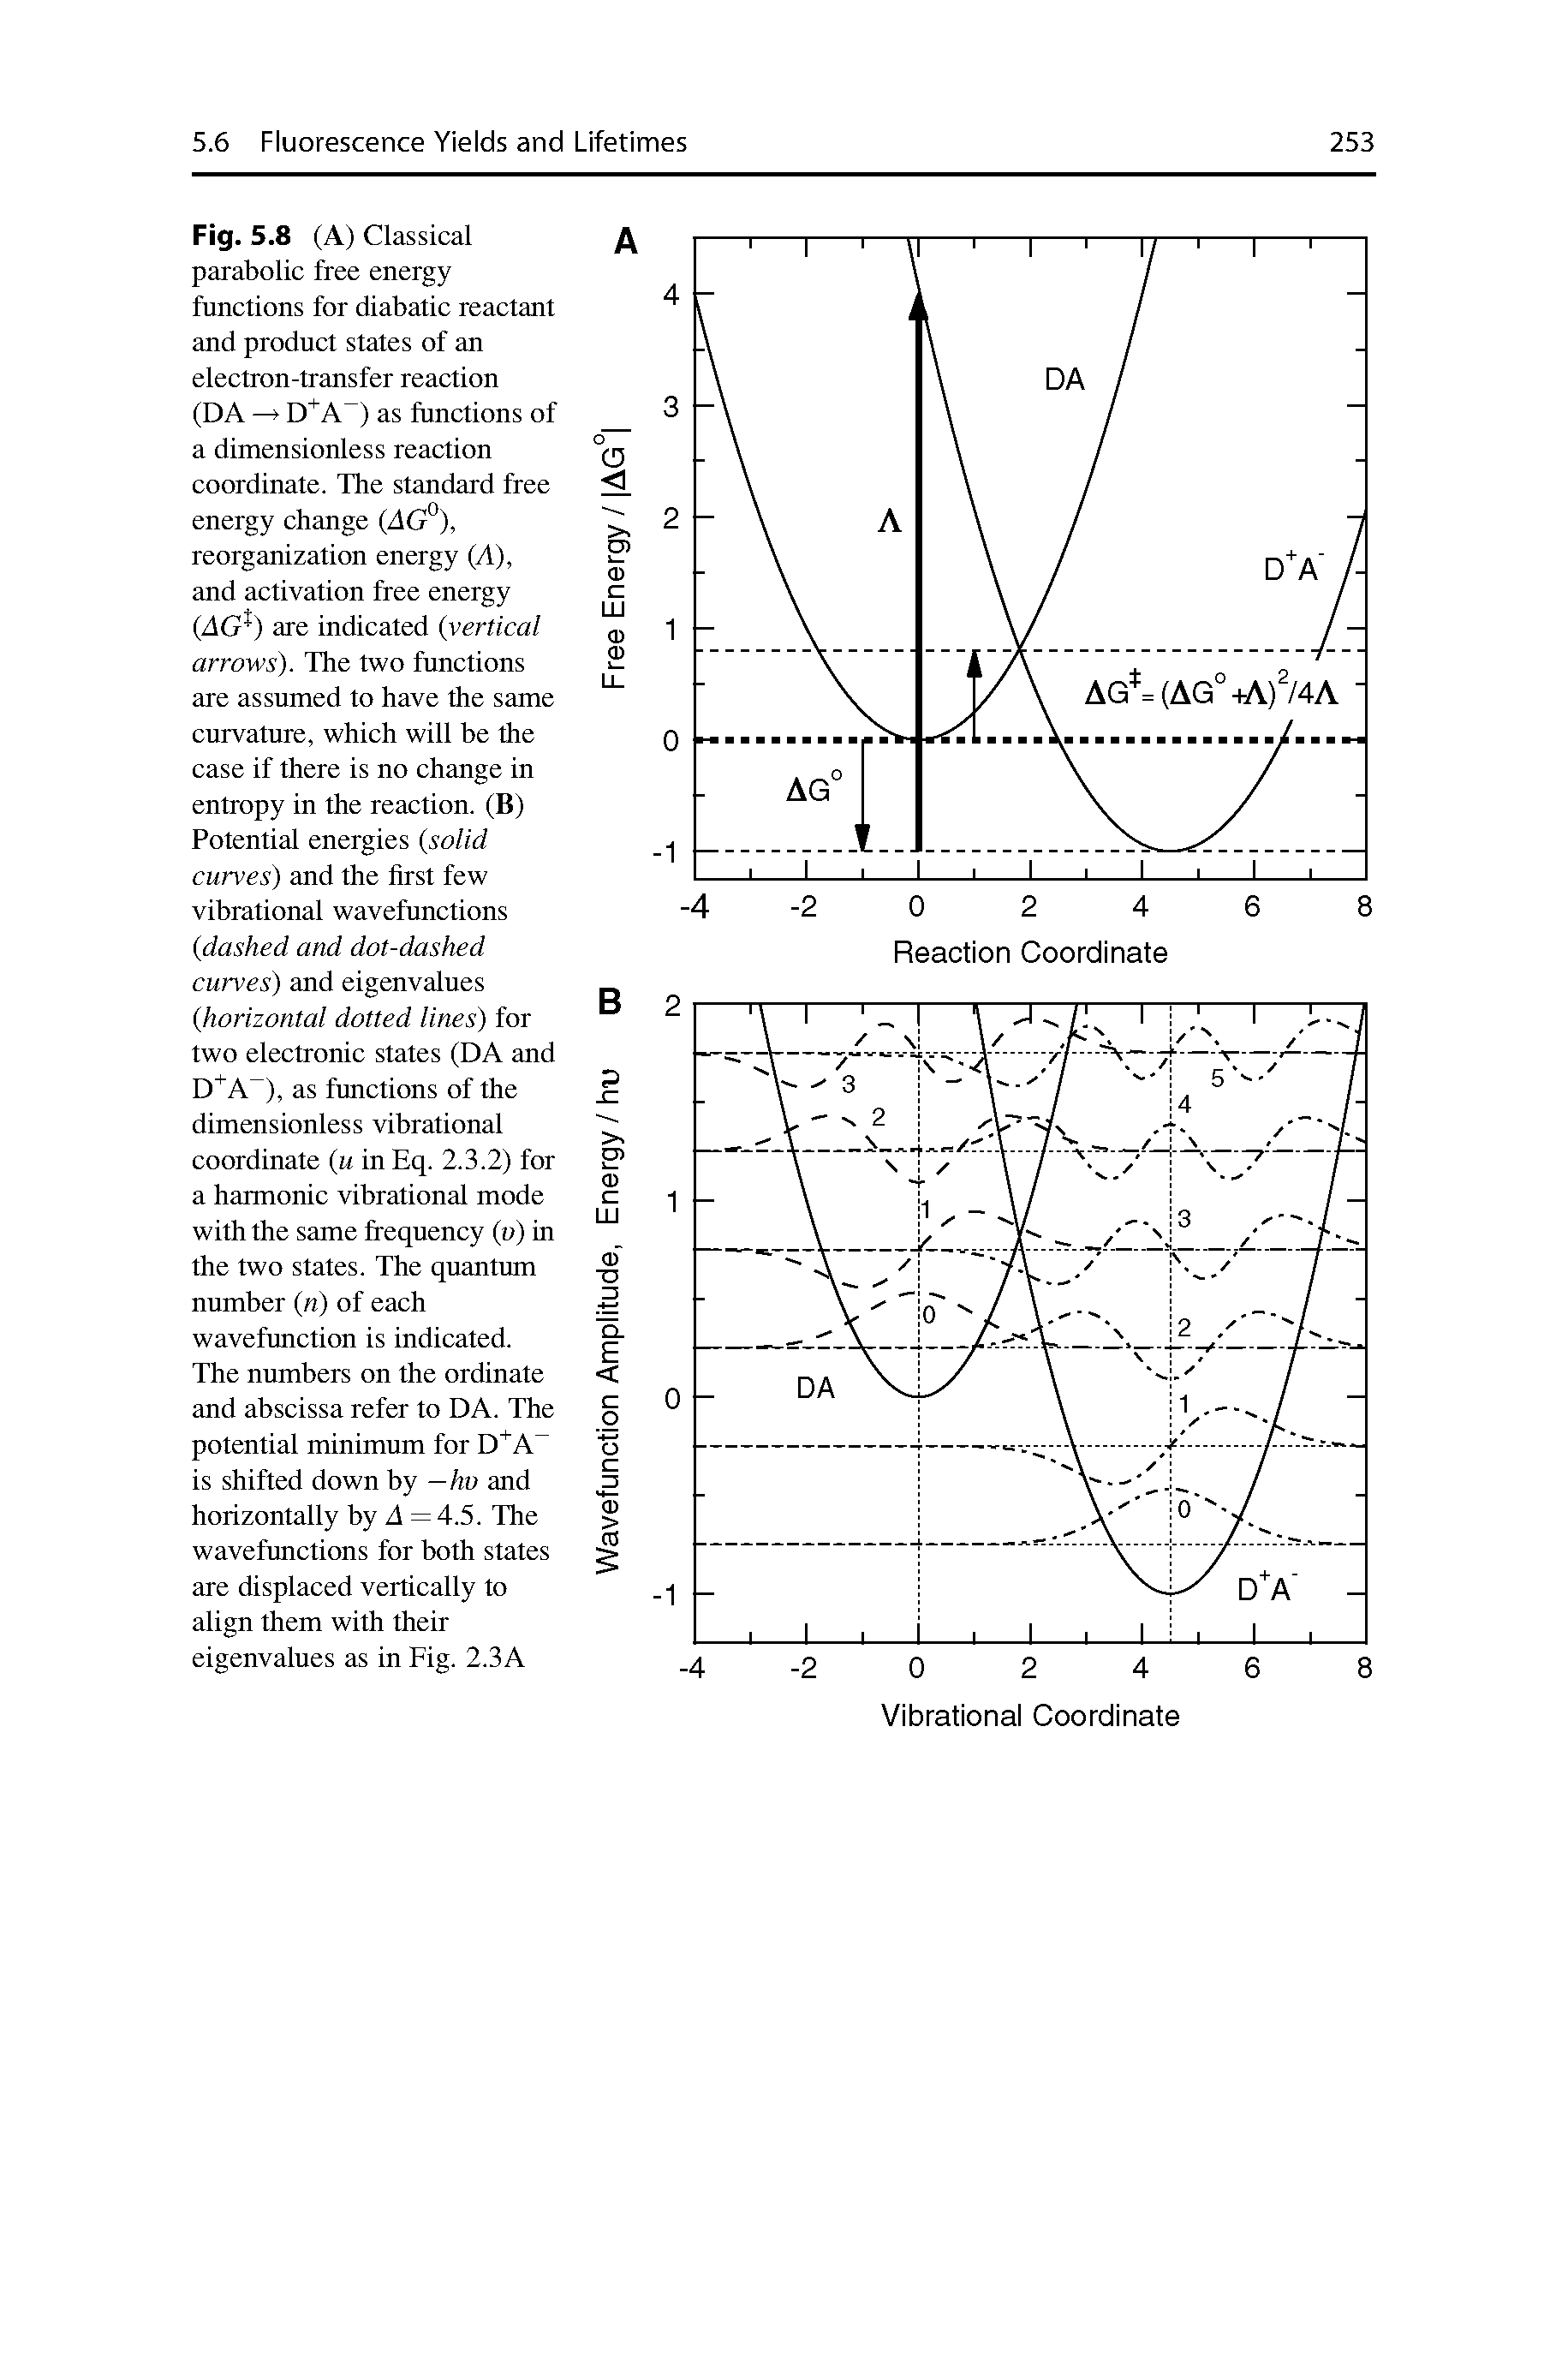 Fig. 5.8 (A) Classical parabolic free energy functions for diabatic reactant and product states of an electron-transfer reaction (DA D A ) as functions of a dimensionless reaction coordinate. The standard free energy change (AG ), reorganization energy (A), and activation free energy (AG ) are indicated vertical arrows). The two functions are assumed to have the same curvature, which will be the case if there is no change in entropy in the reaction. (B) Potential energies (solid curves) and the first few vibrational wavefunctions (dashed and dot-dashed curves) and eigenvalues (horizontal dotted lines) for two electronic states (DA and D A ), as functions of the dimensionless vibrational coordinate (u in Eq. 2.3.2) for a harmonic vibrational mode with the same frequency (v) in the two states. The quantum number (n) of each wavefunction is indicated.